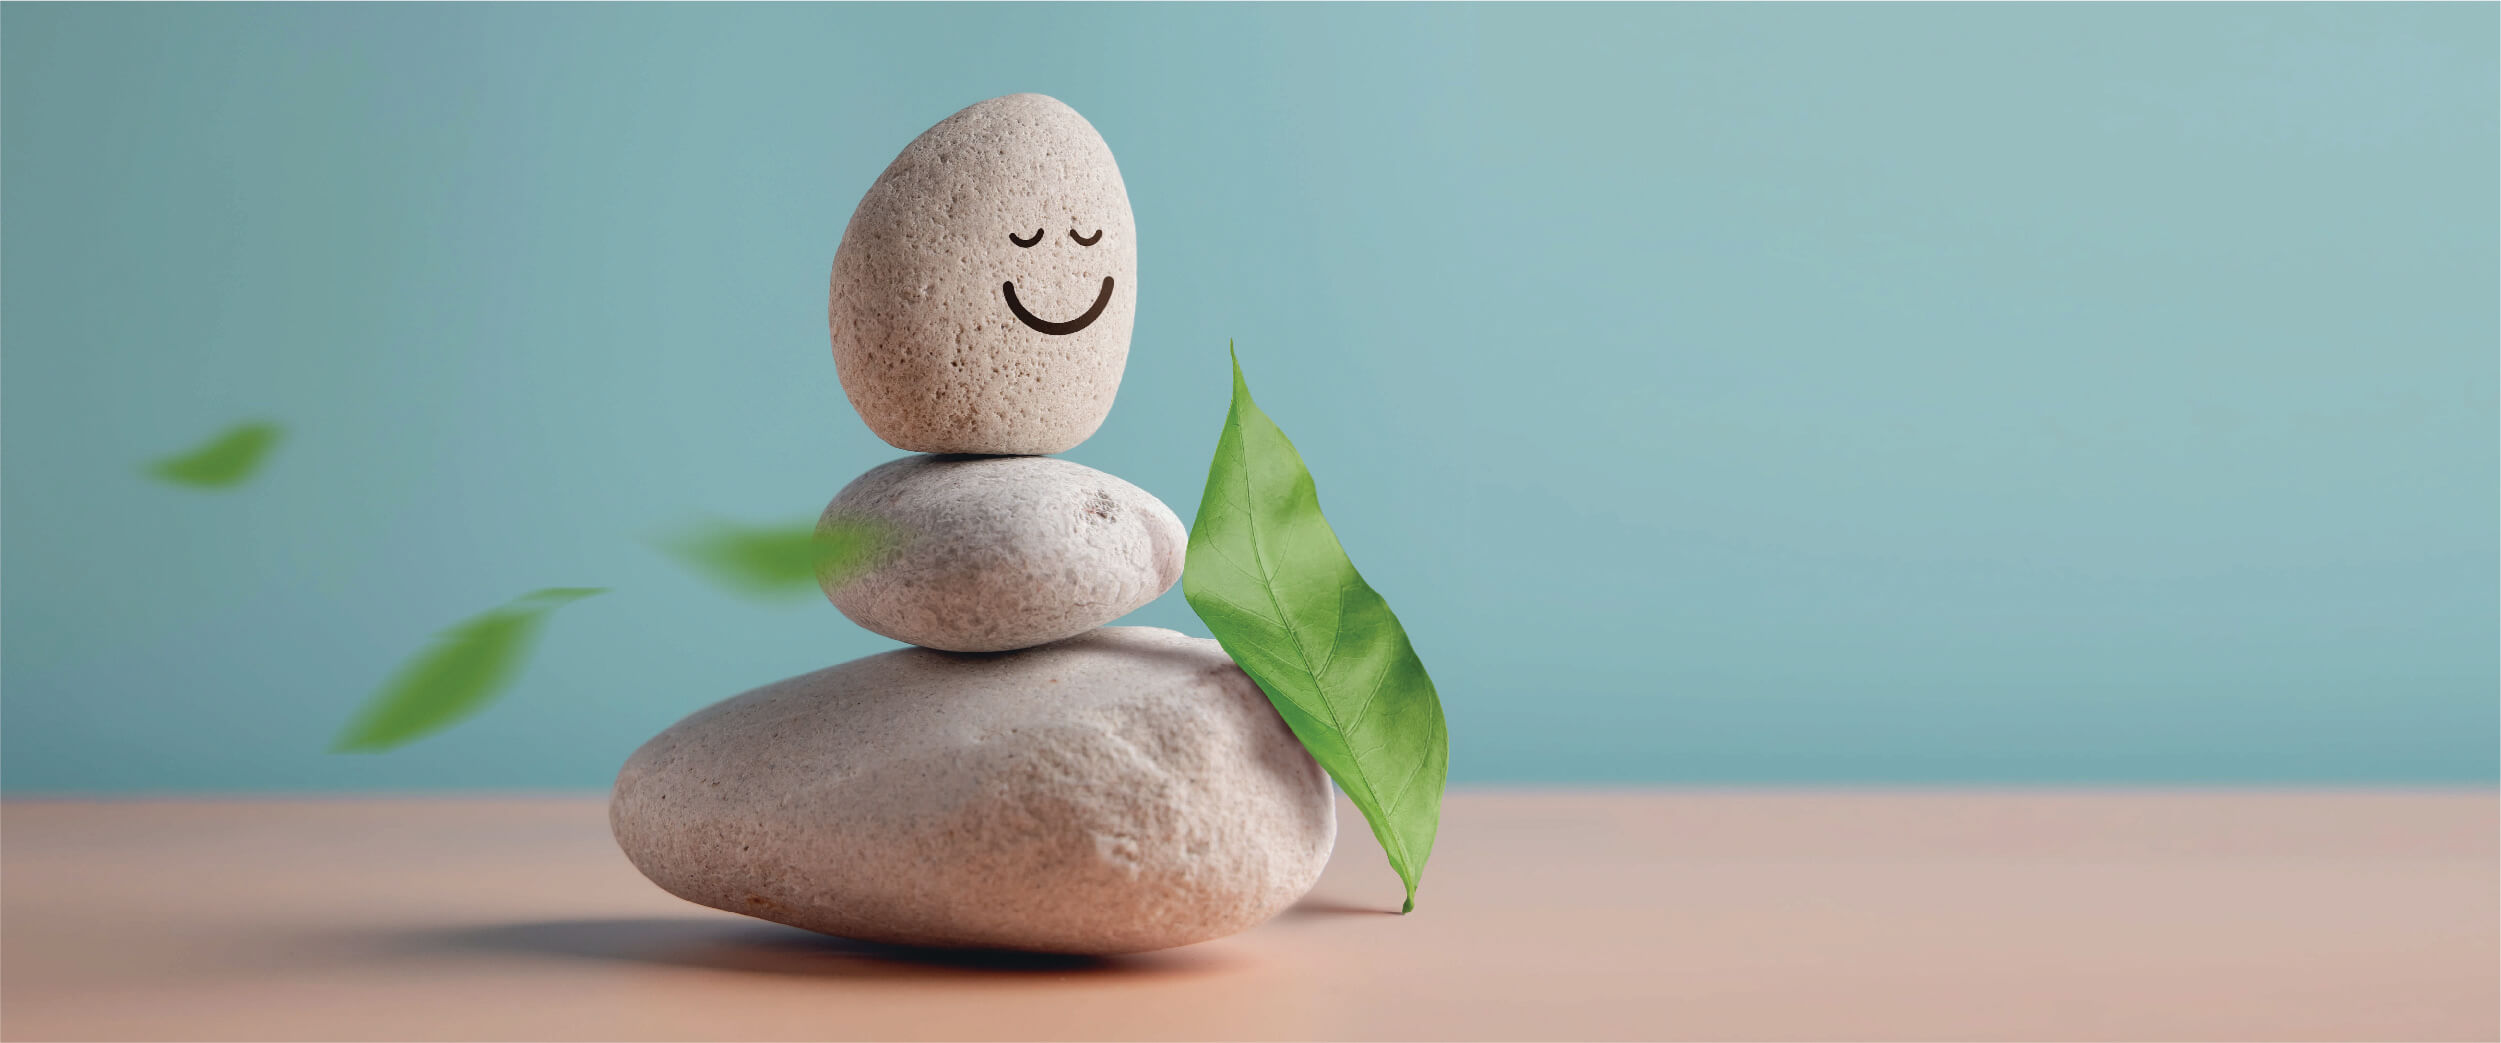 Reset, Relax, and Recharge by Practicing Mindfulness